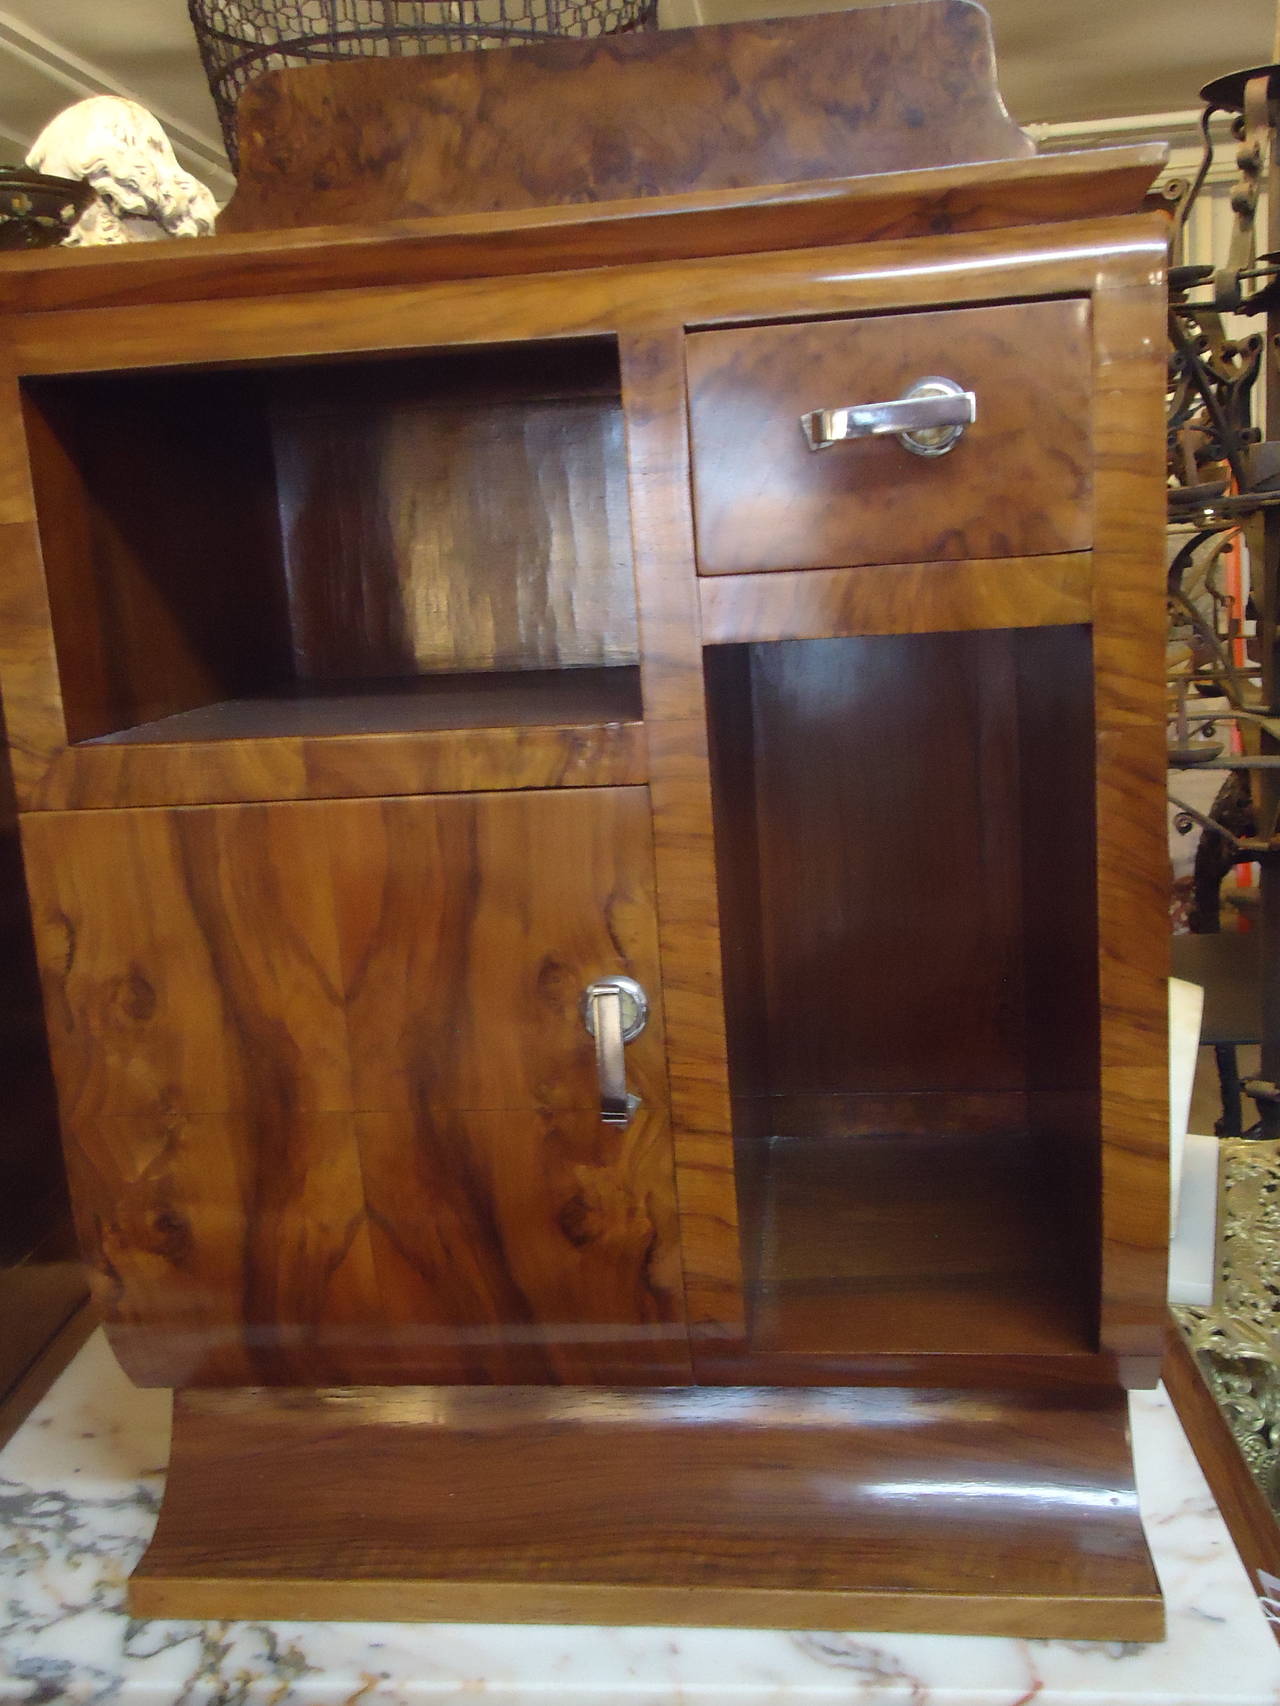 Fabulous art deco walnut night stands with original hardware.
Measure: 25.5 H to top surface.
31 H to back splash.